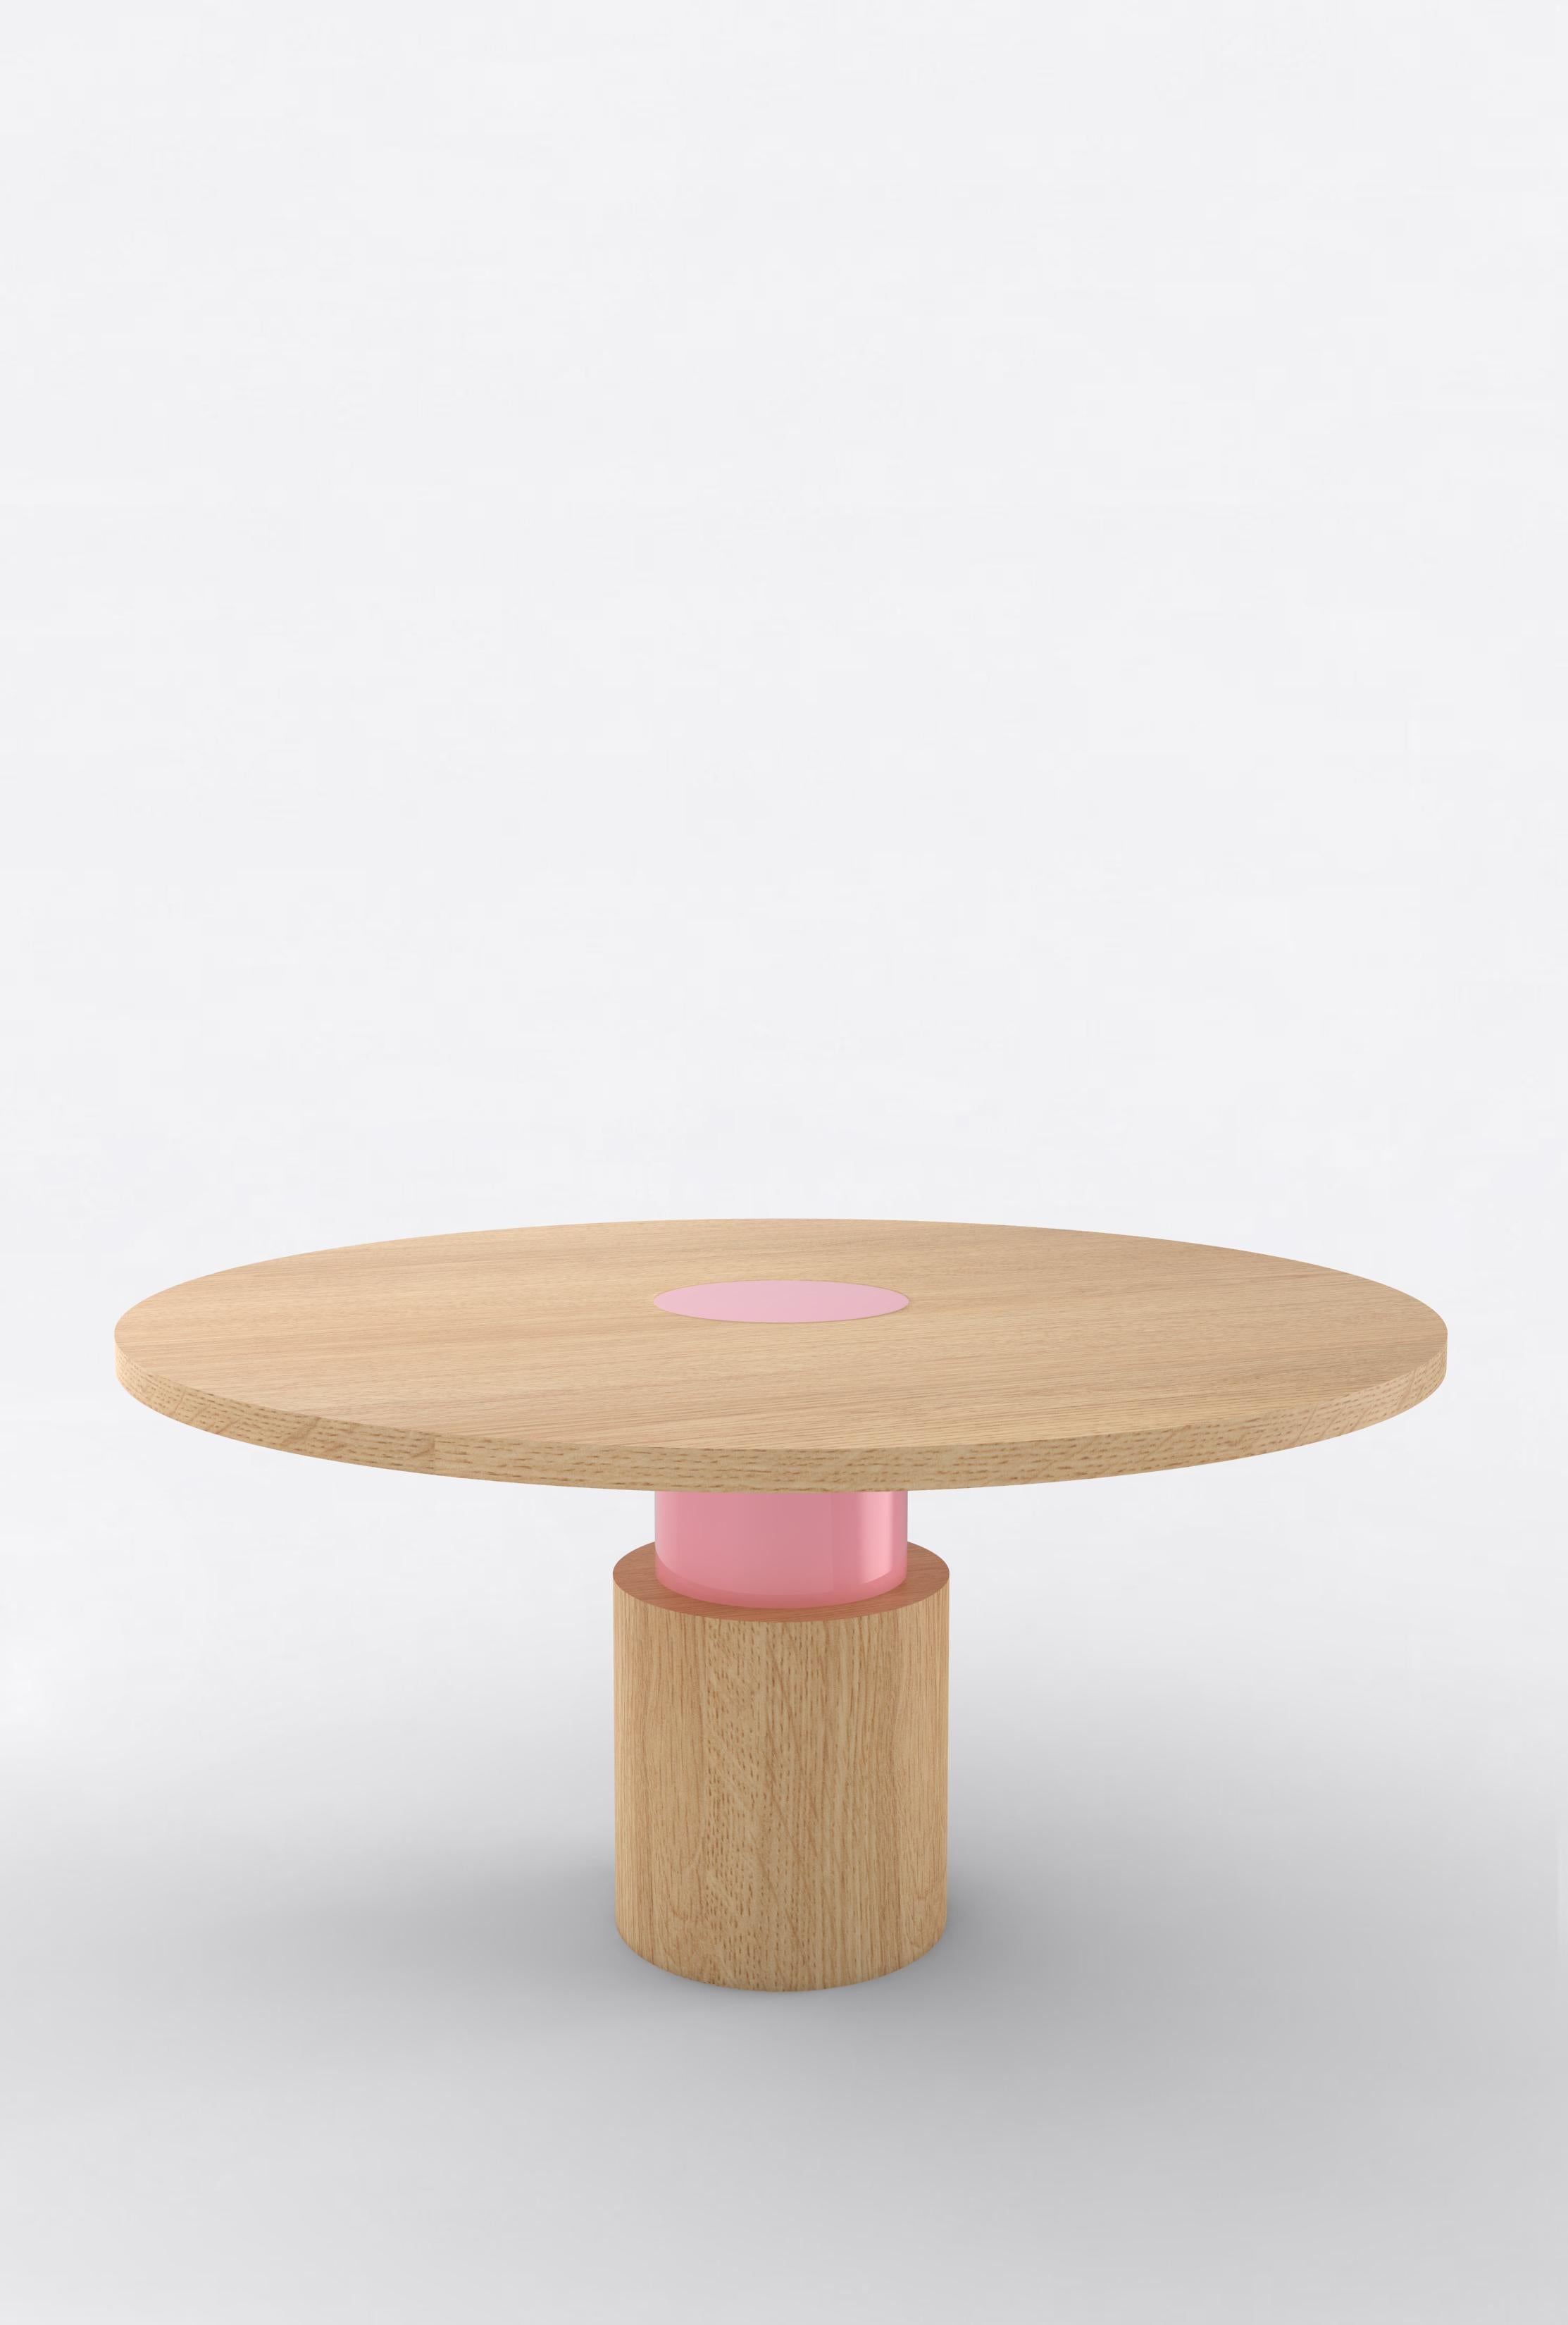 Orphan work 100C Dining Table, 2020
Shown in oak with color.
Available in natural oak with painted base.
Colors available: pink, mint, yellow, blue and brown.
Measures: 60